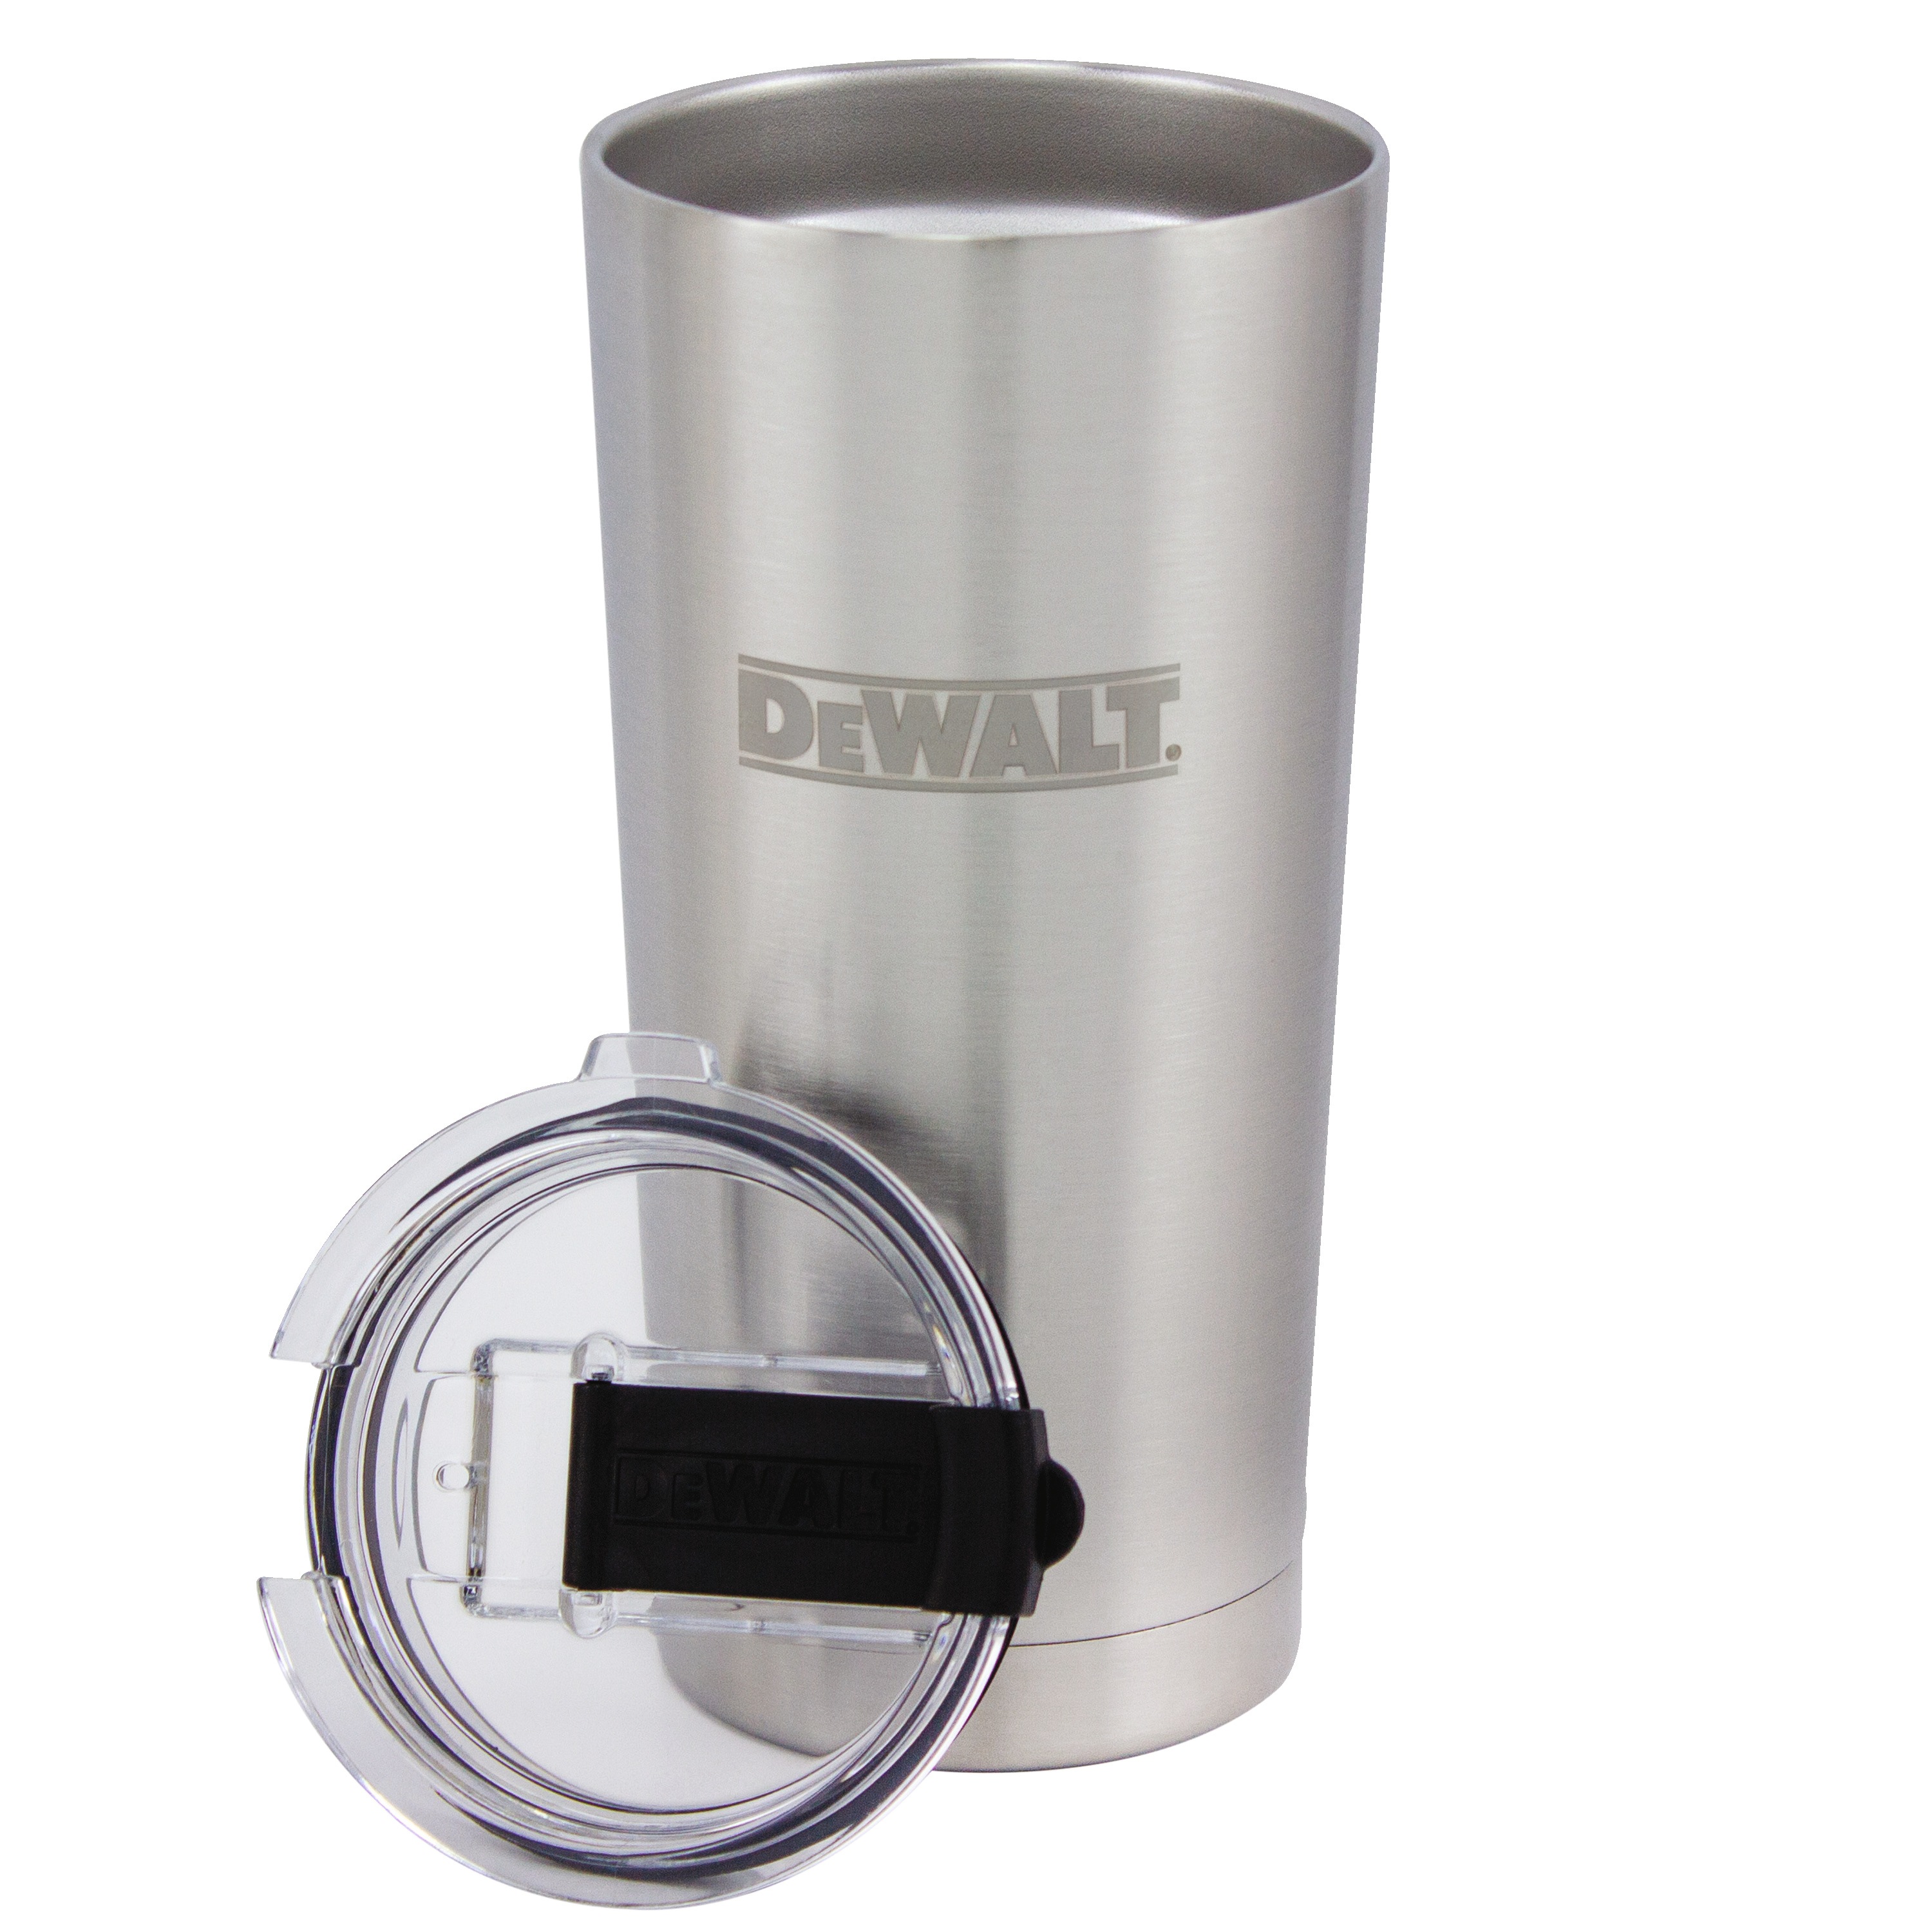 B P A free lid of 20 Ounce Stainless steel tumbler.